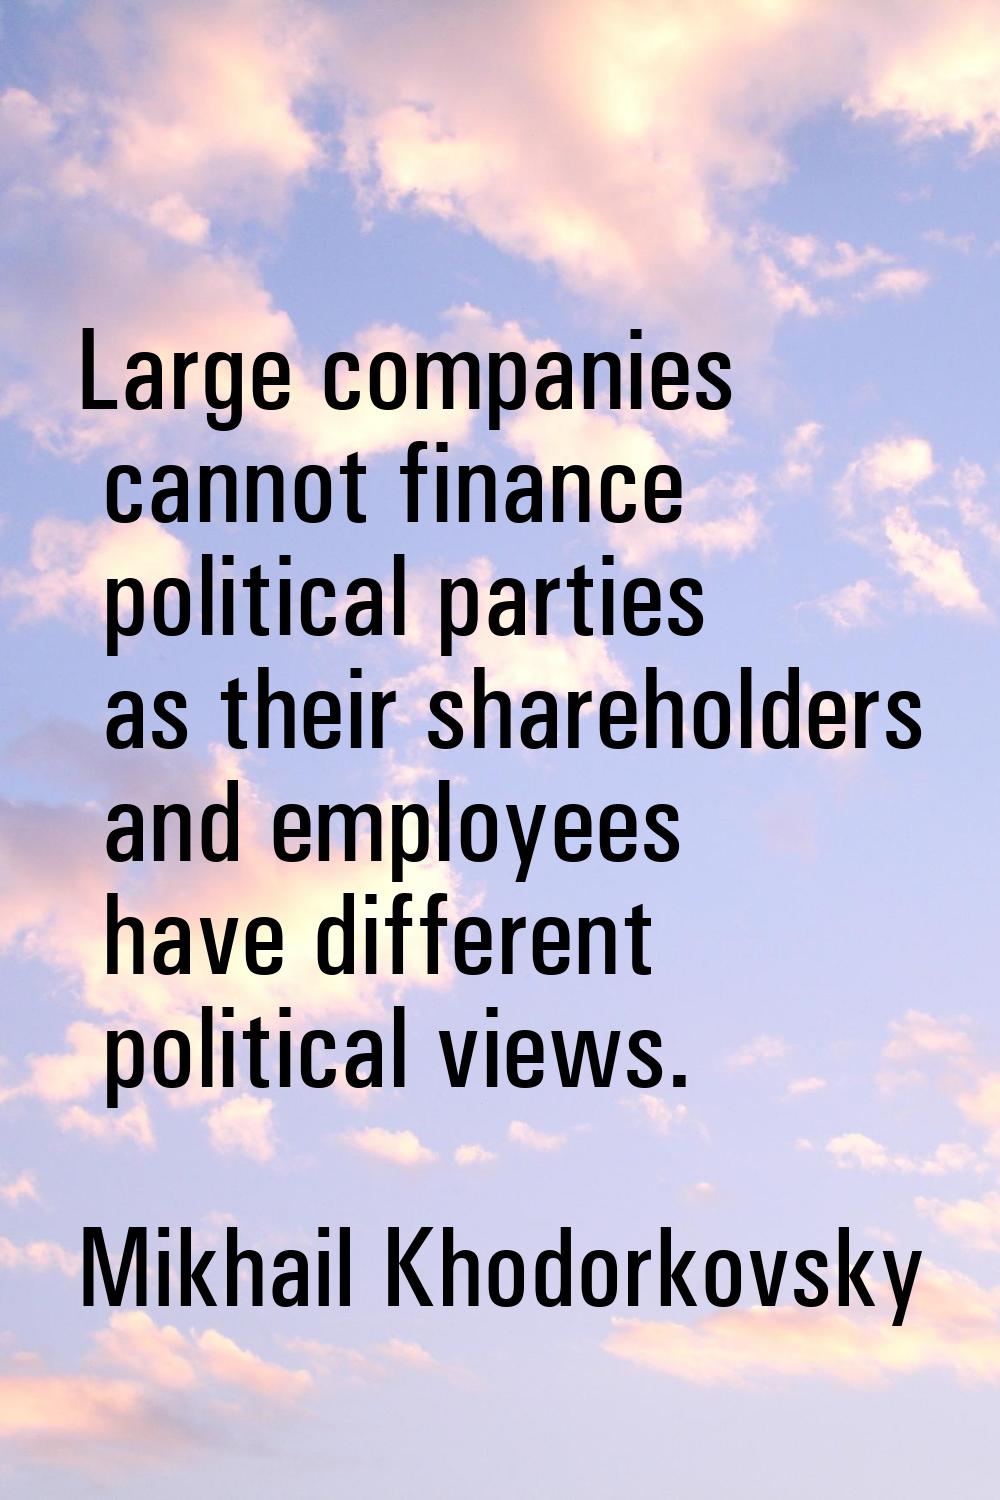 Large companies cannot finance political parties as their shareholders and employees have different